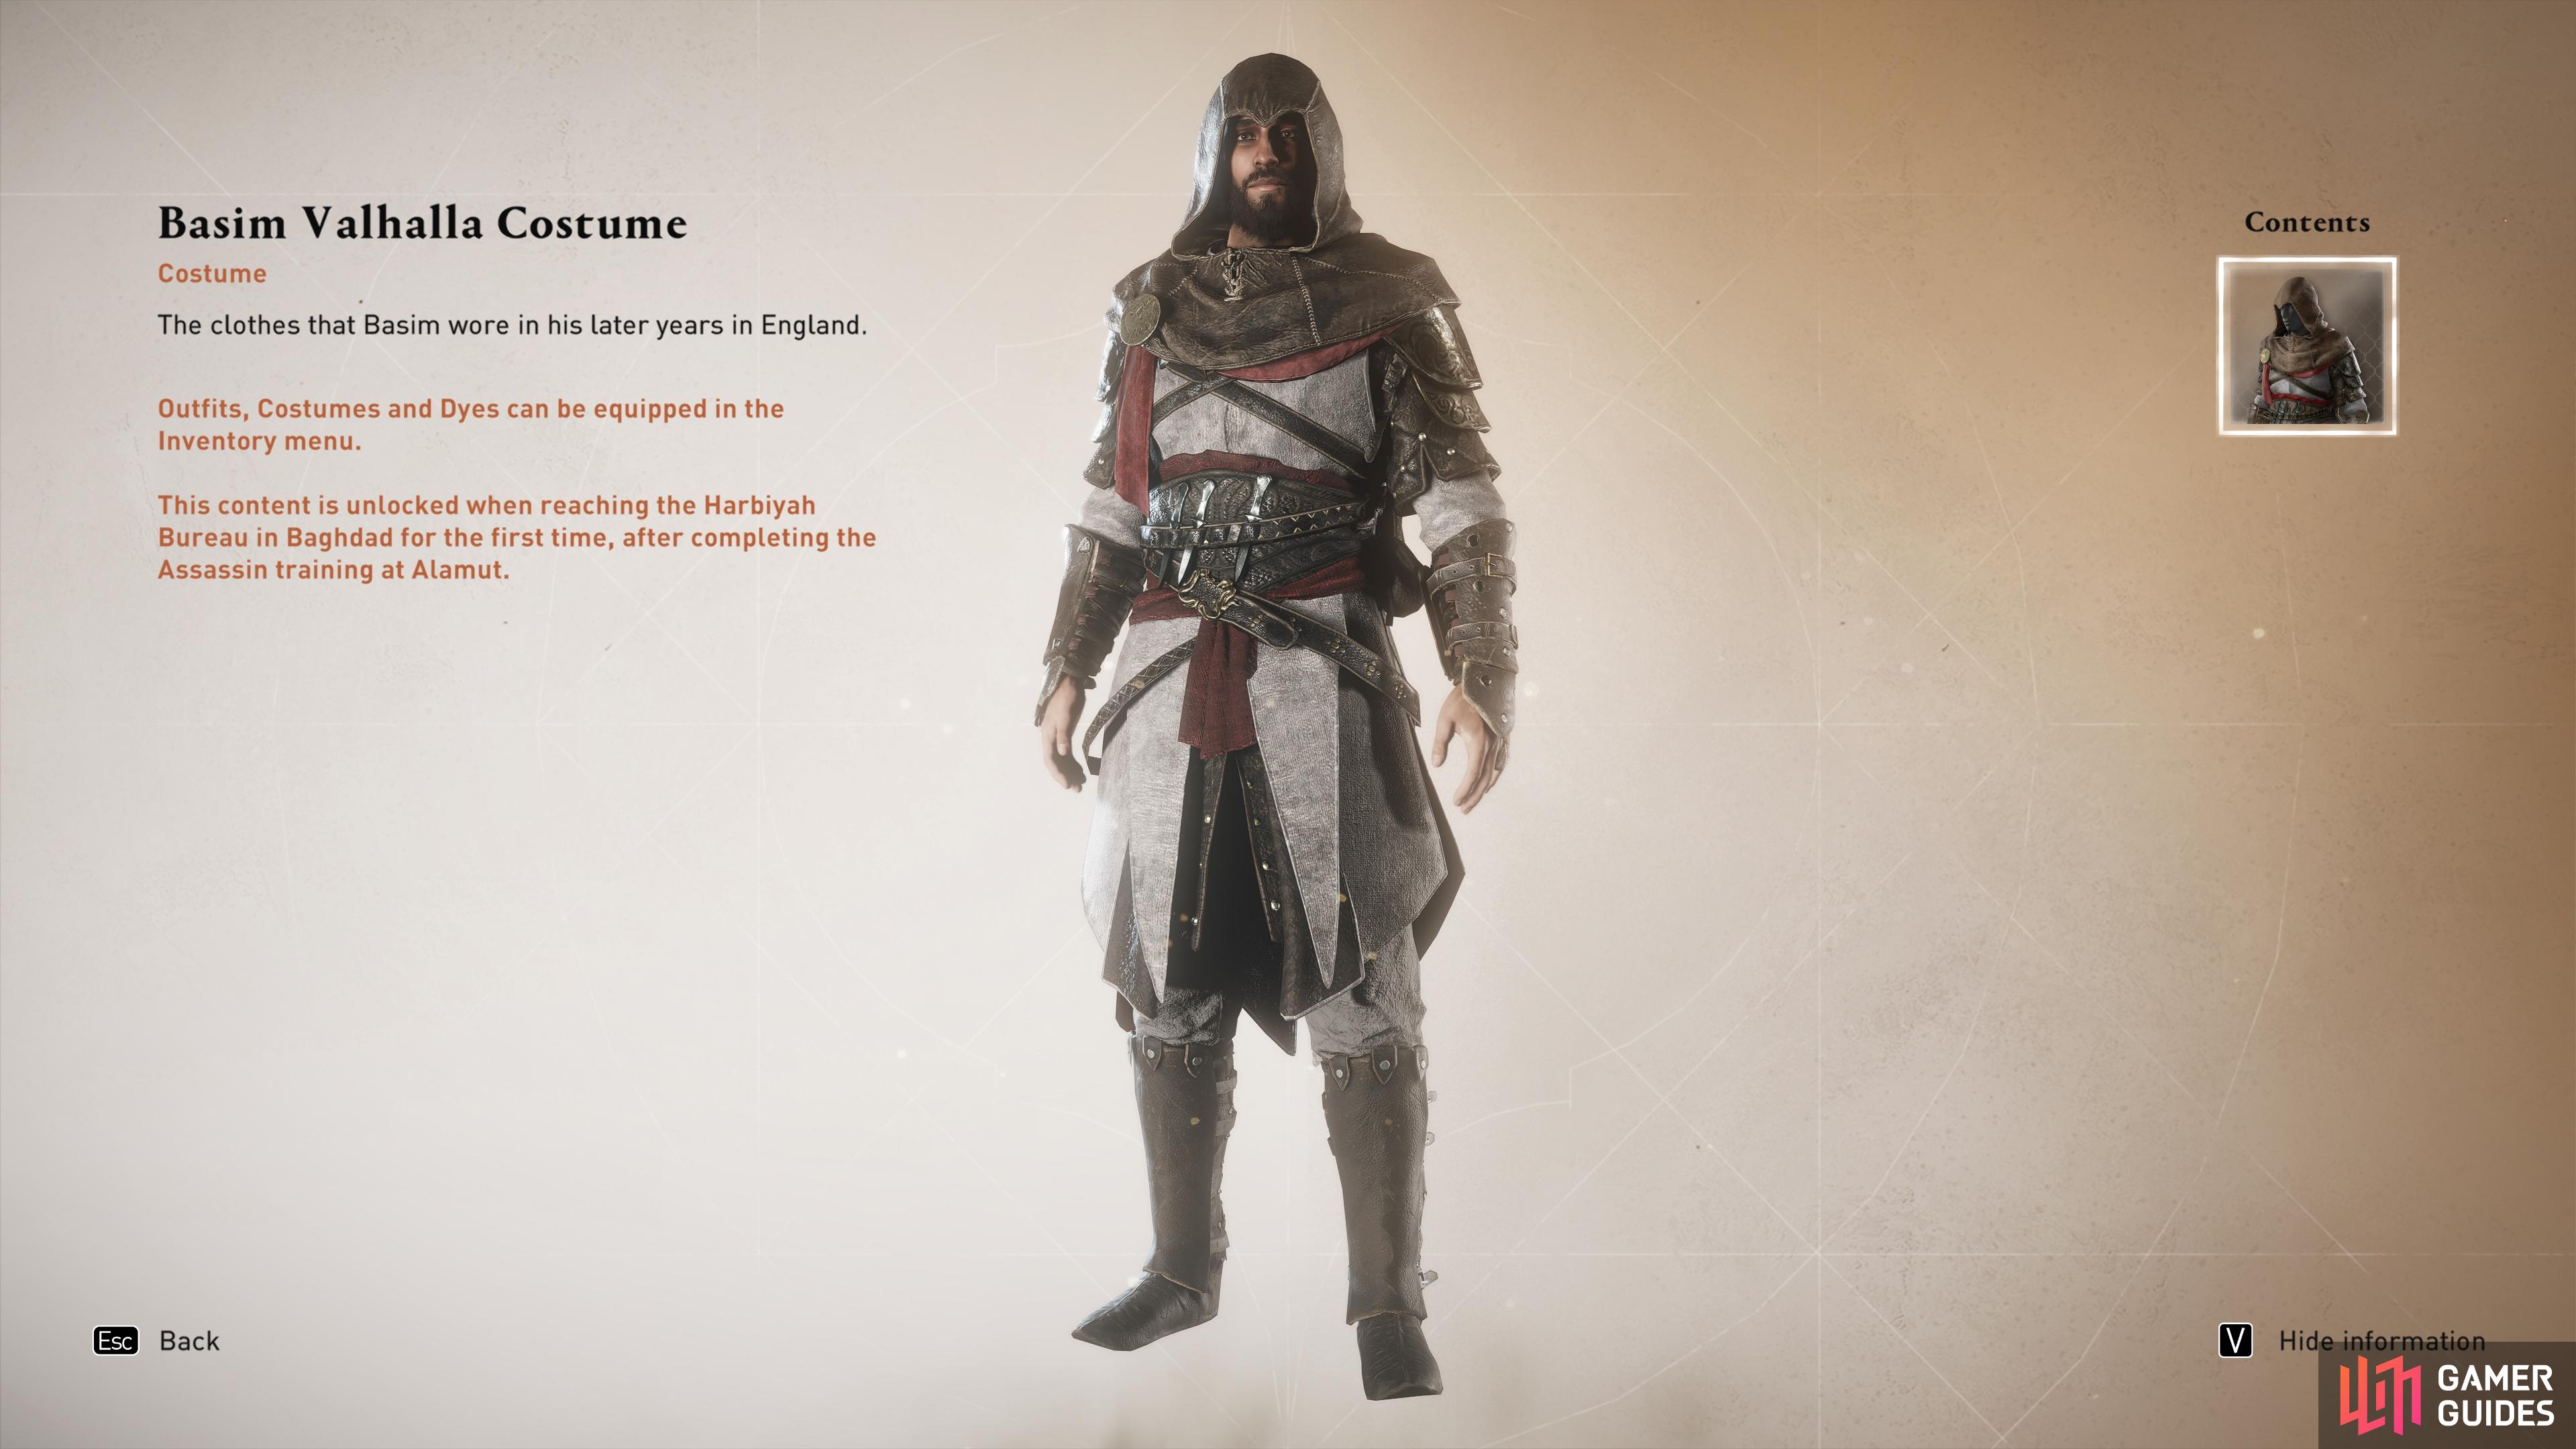 The old Basim costume from Assassin’s Creed Valhalla.